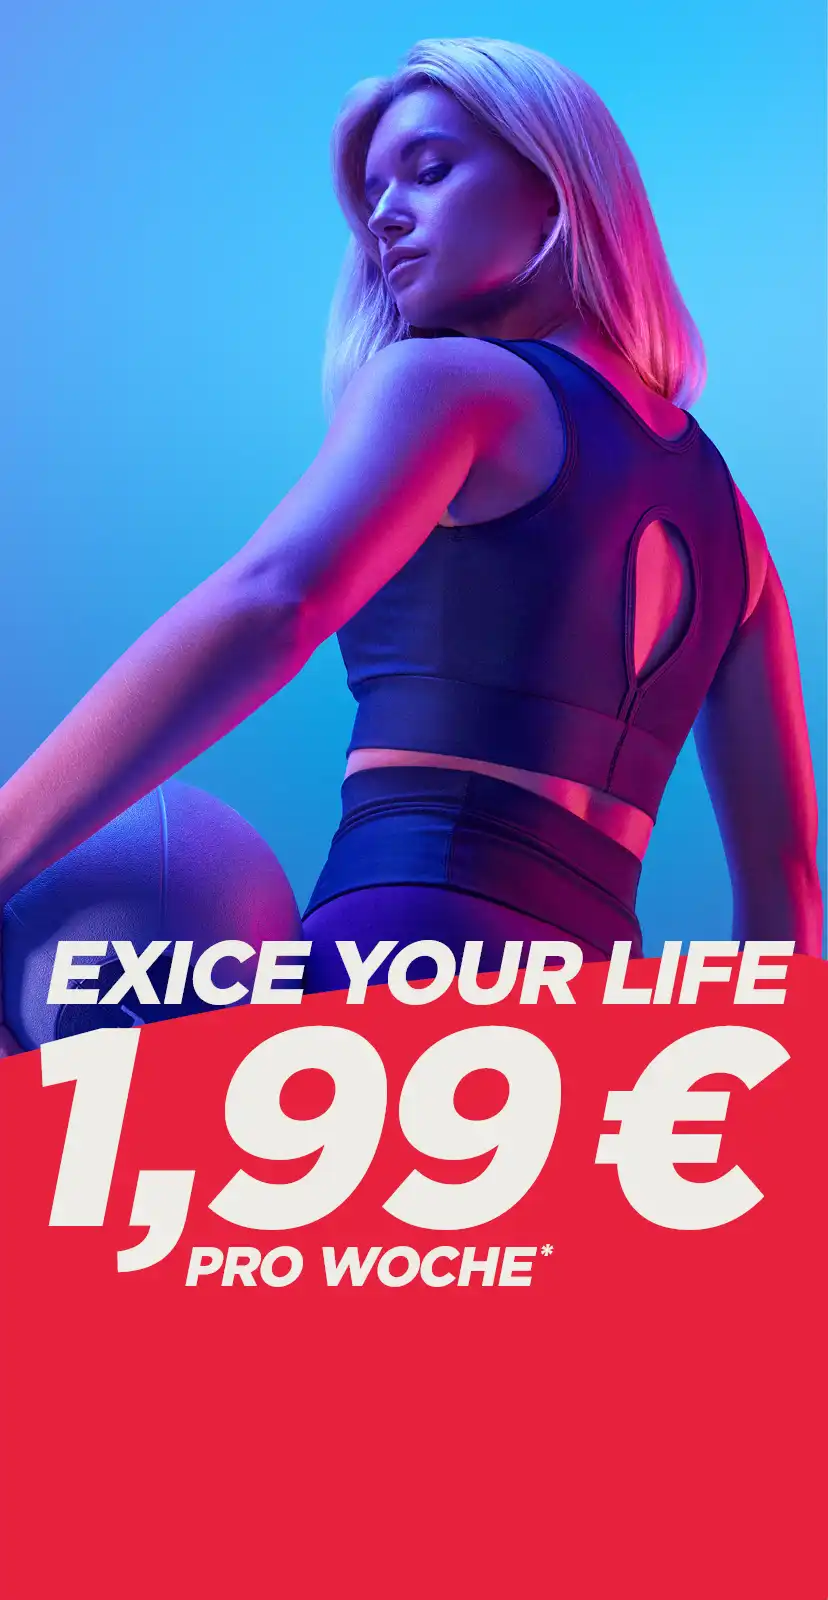 EXICE YOU LIFE - 1,99€ PRO WOCHE* width=